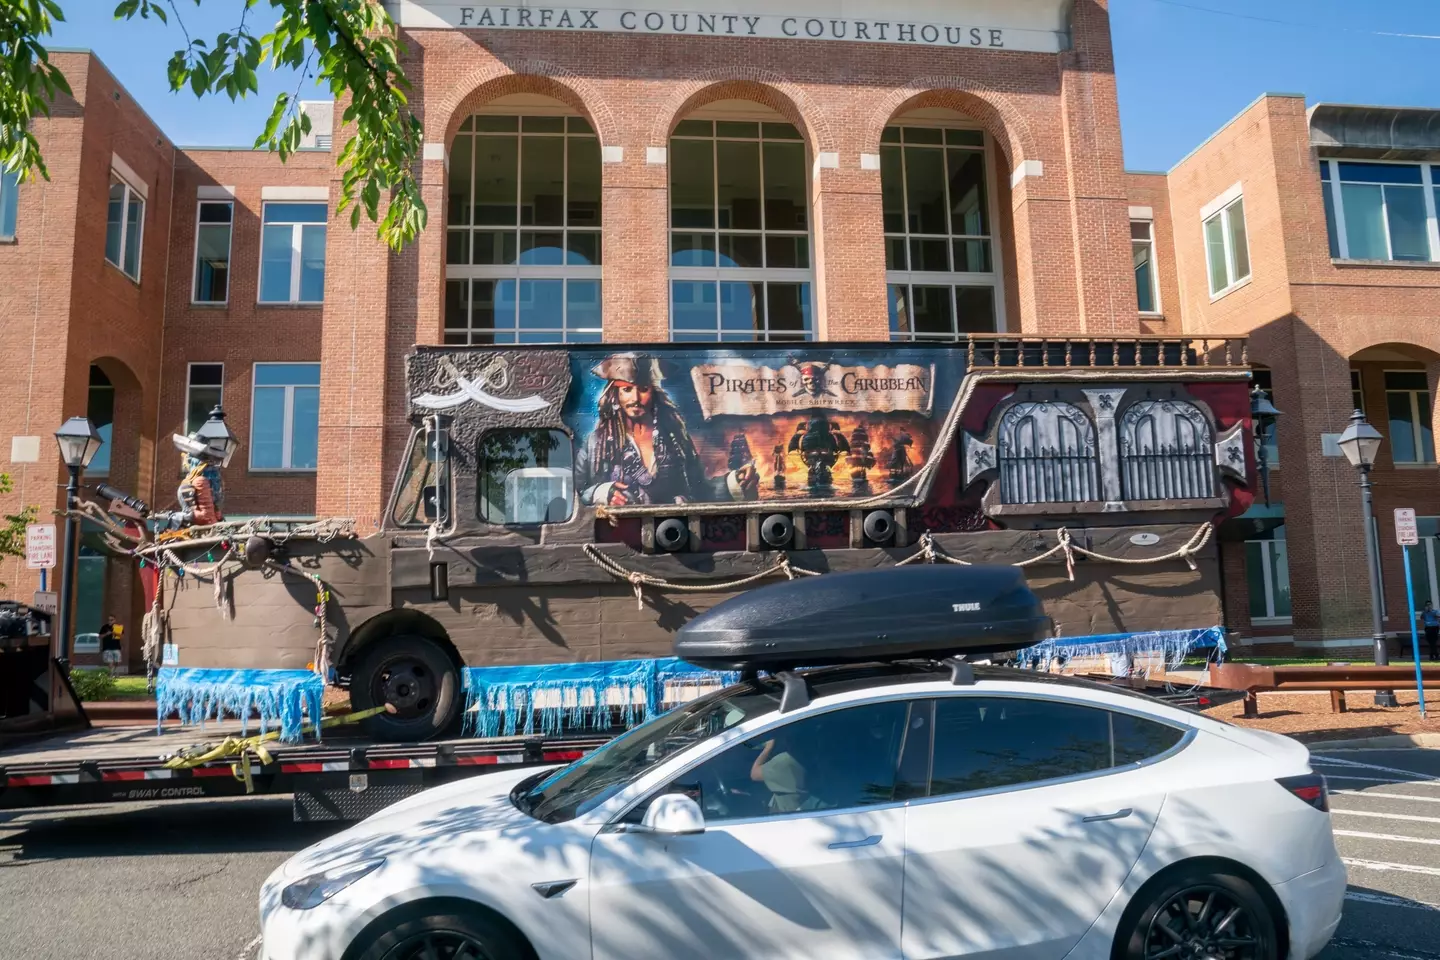 The larger-than-life truck drove past the exact building where Depp will hear the outcome of the trial.